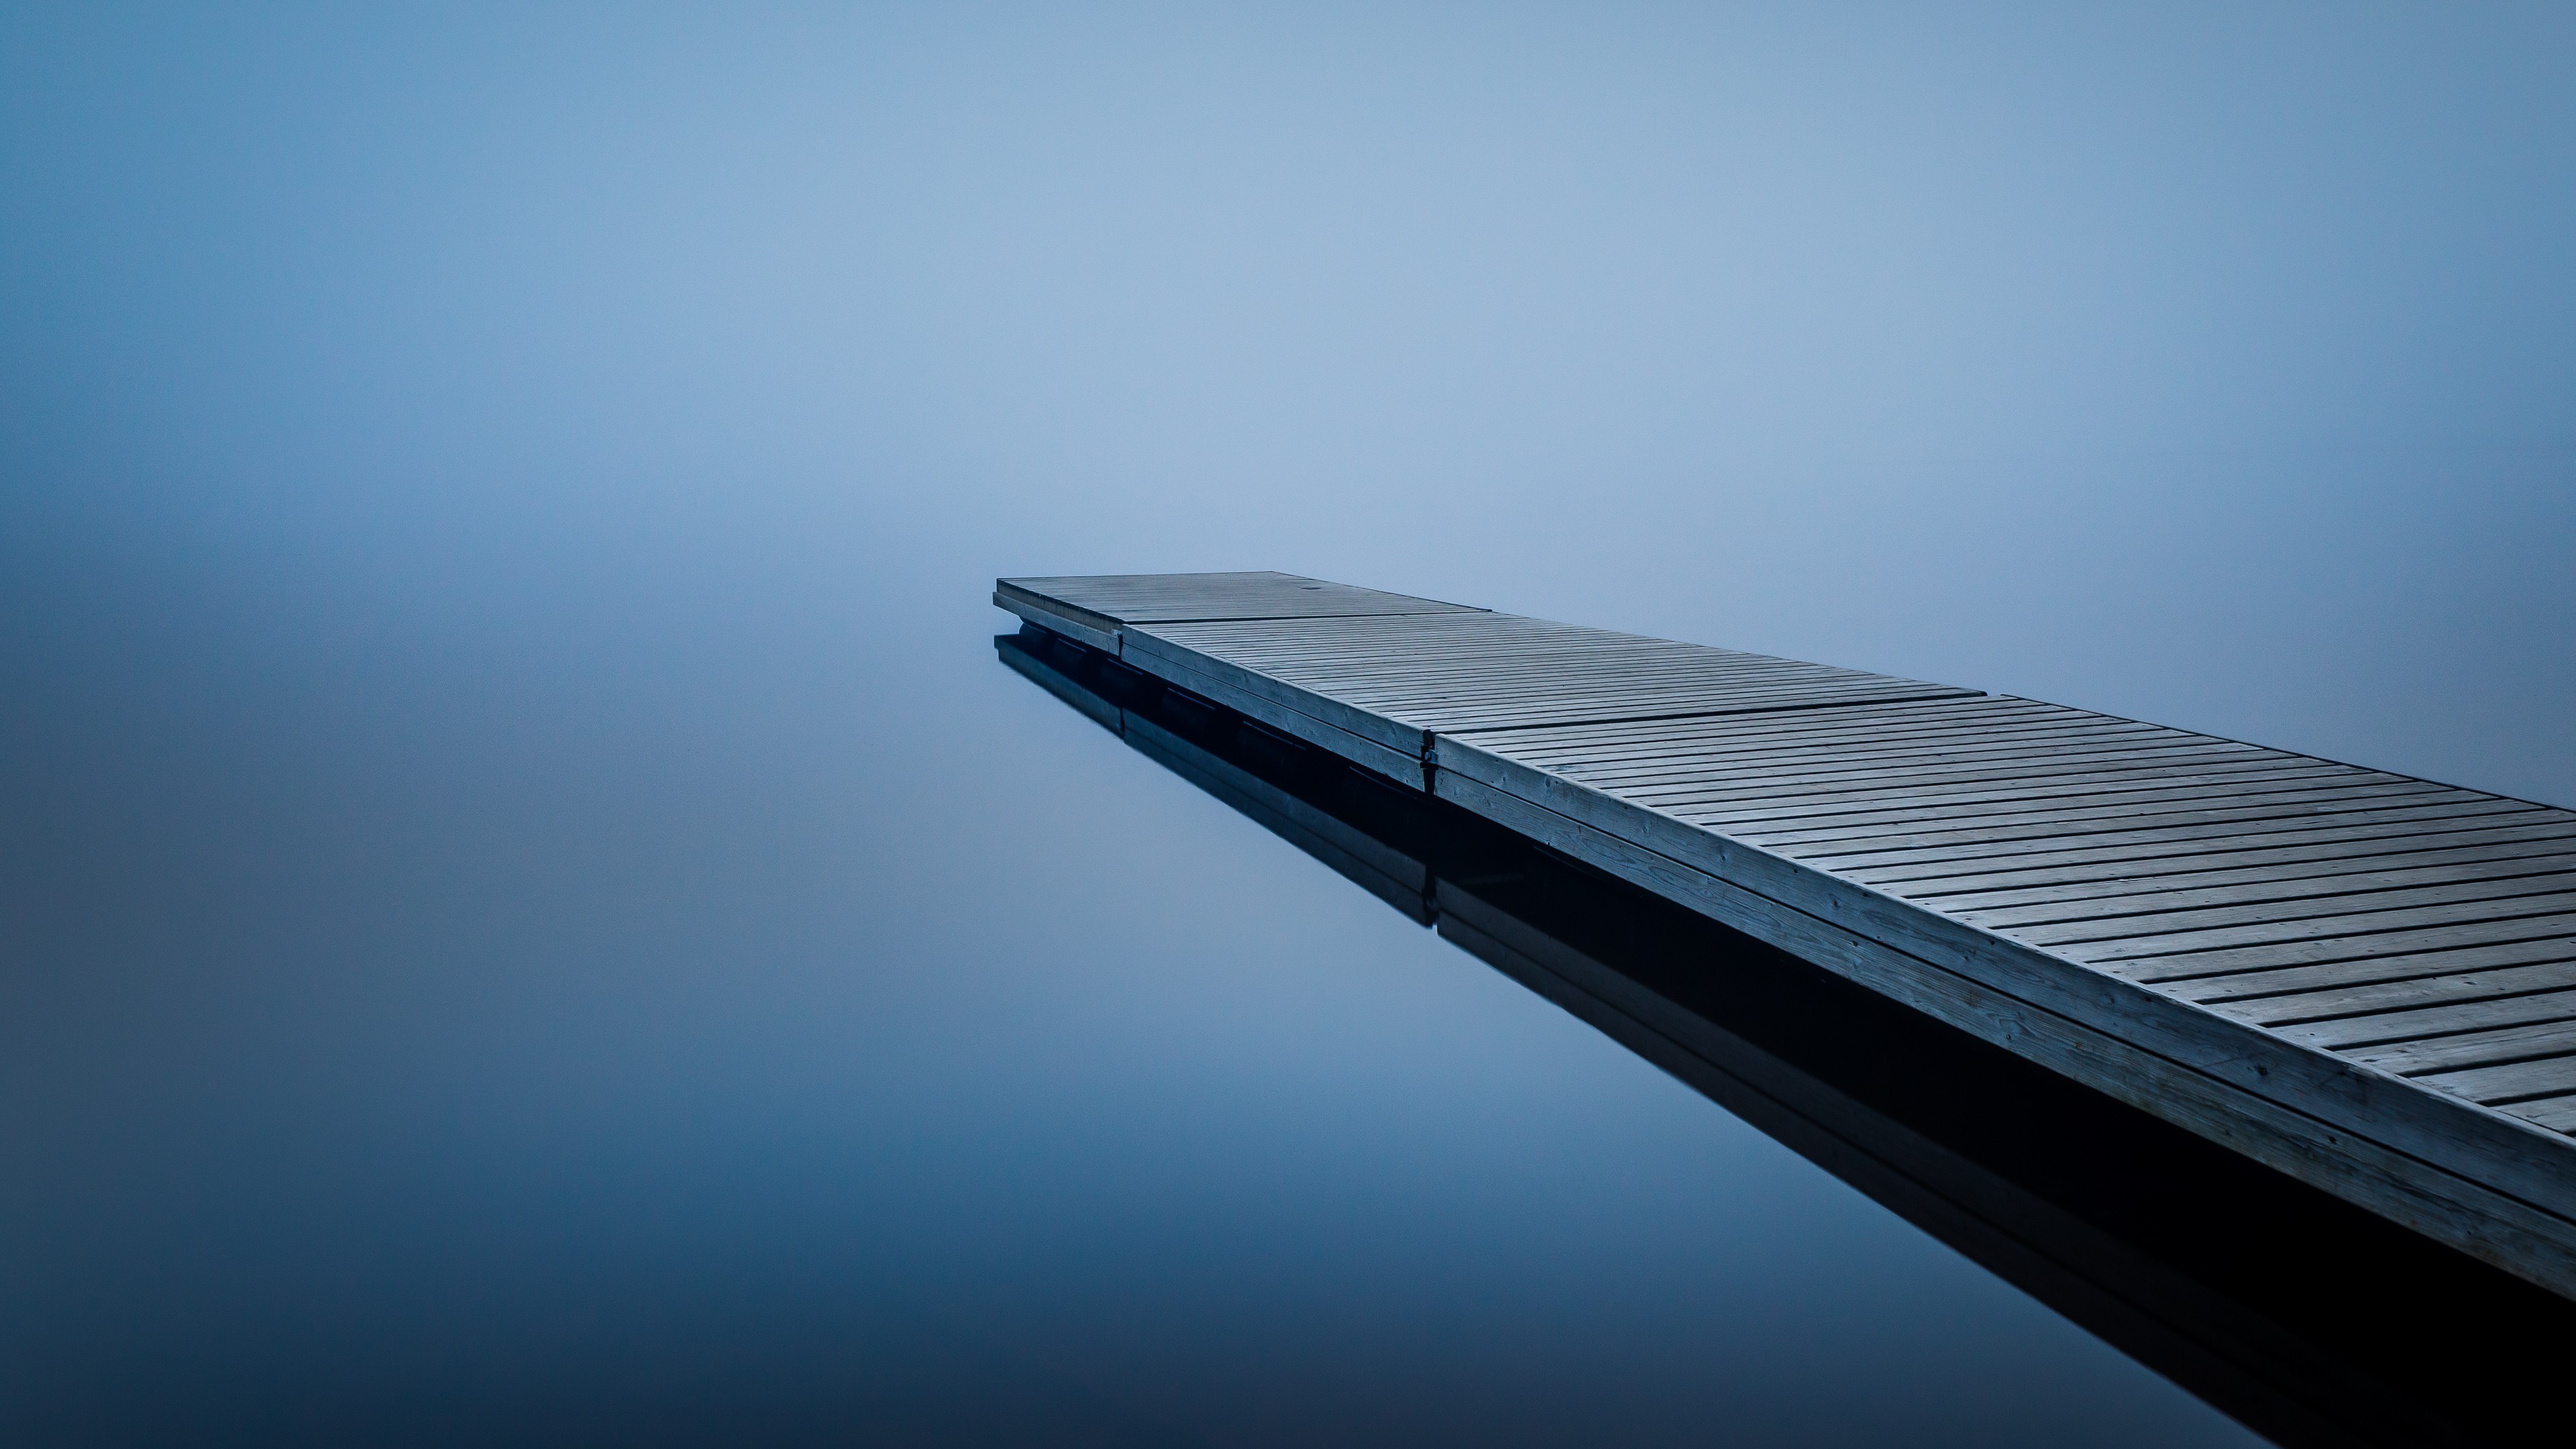 #nature, #calm waters, #sea, #dock, #photography